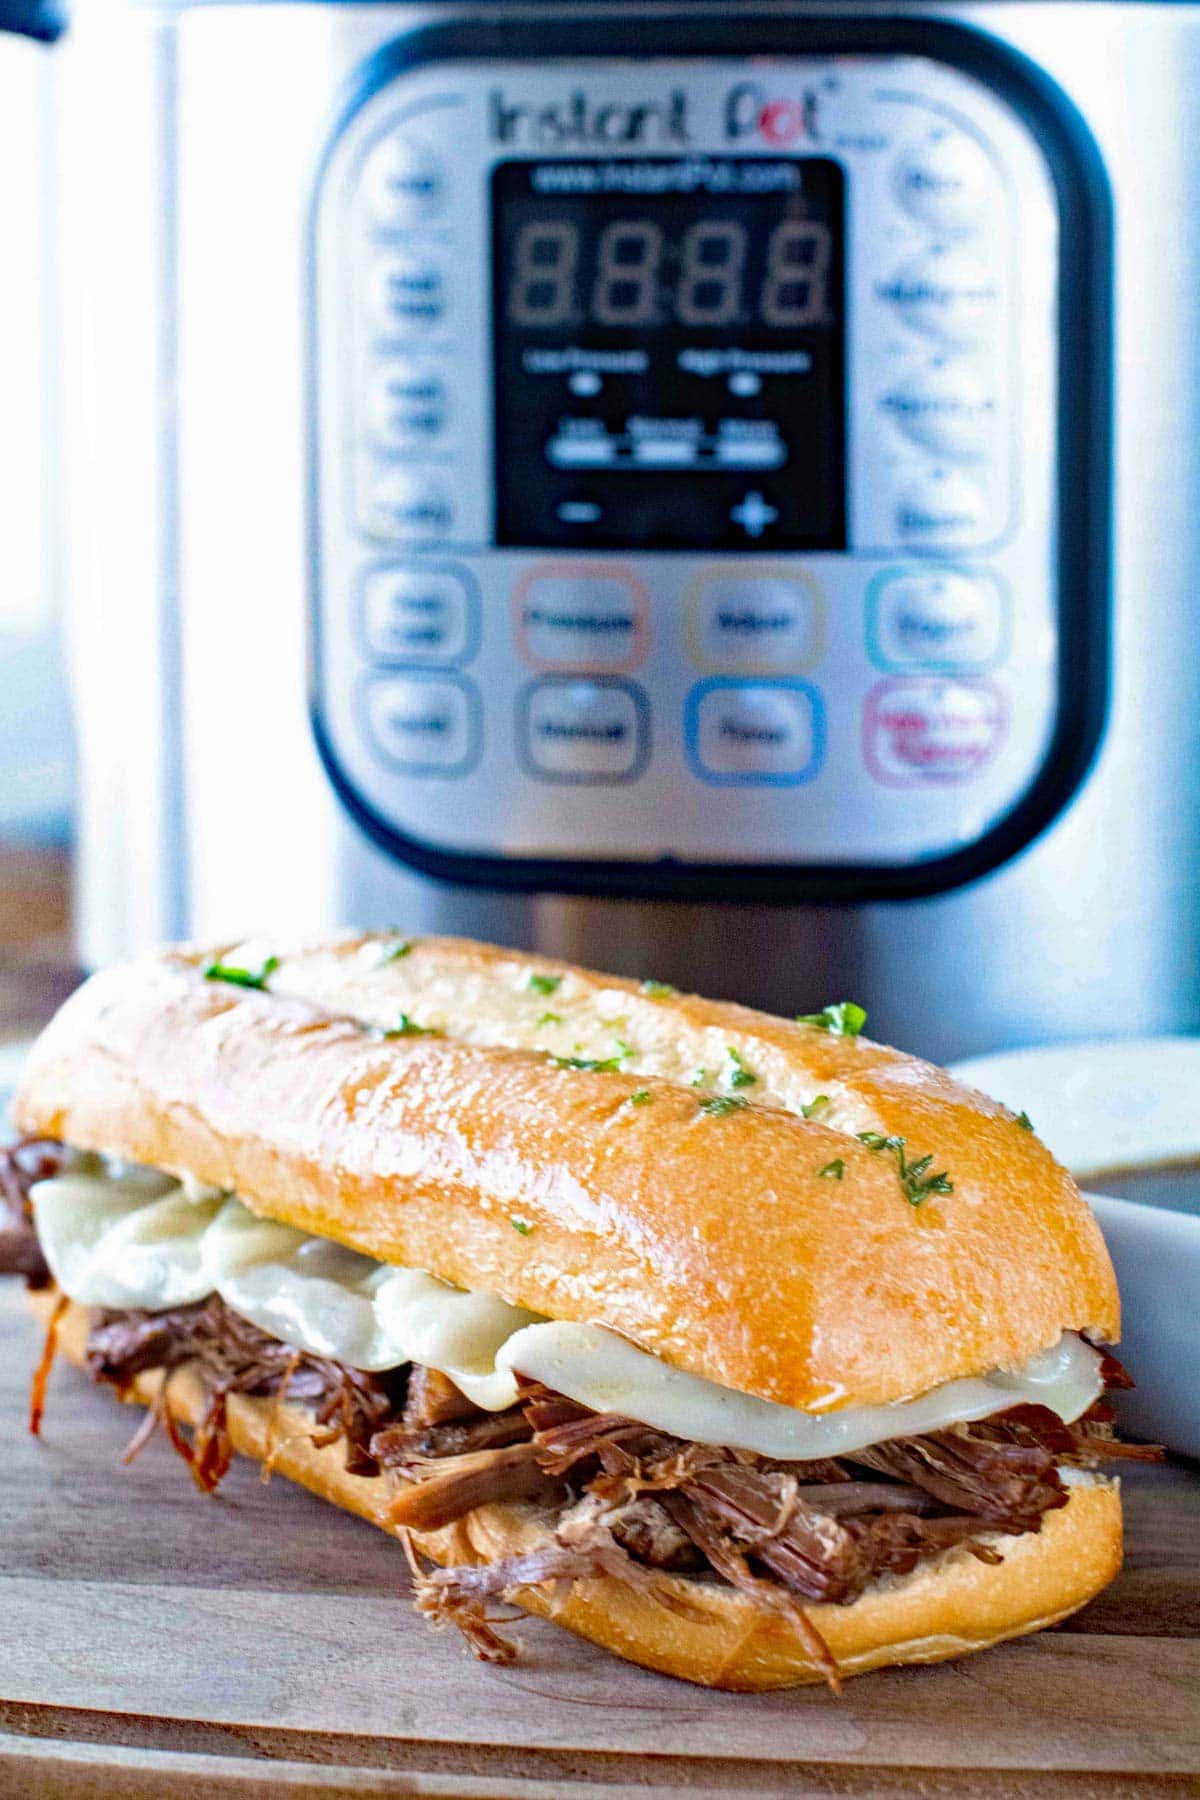 Wood cutting board with french dip sandwich on it with instant pot in background